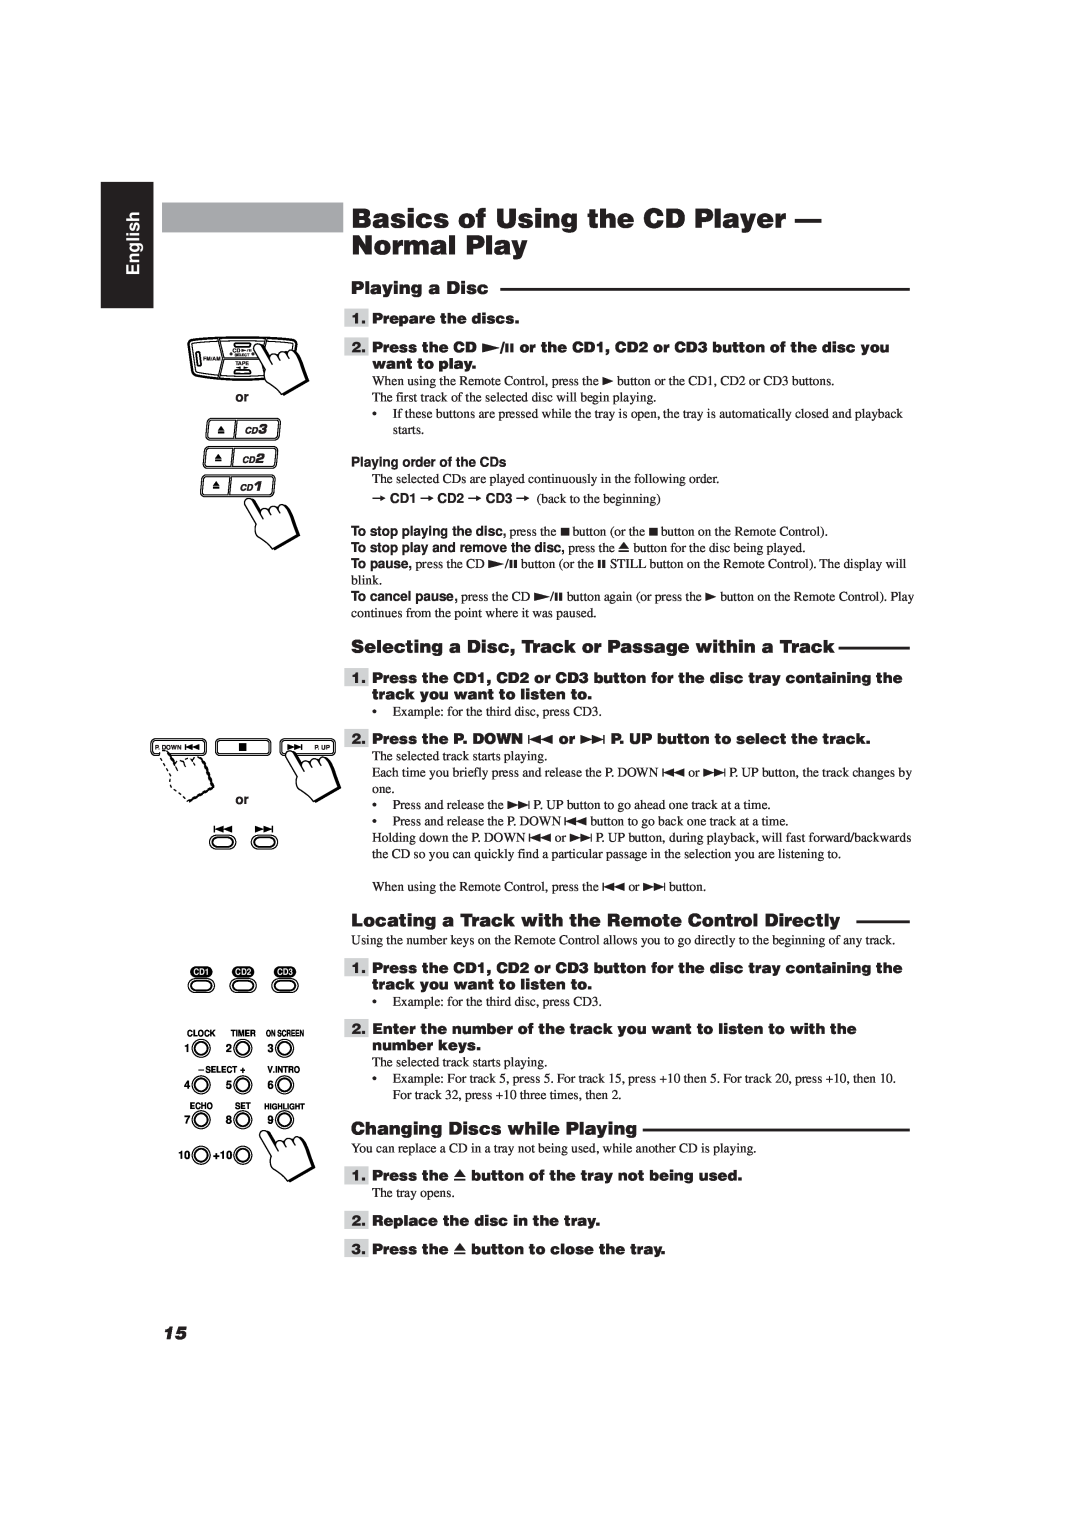 JVC MX-J111V manual Basics of Using the CD Player - Normal Play, Playing a Disc, Changing Discs while Playing, English 